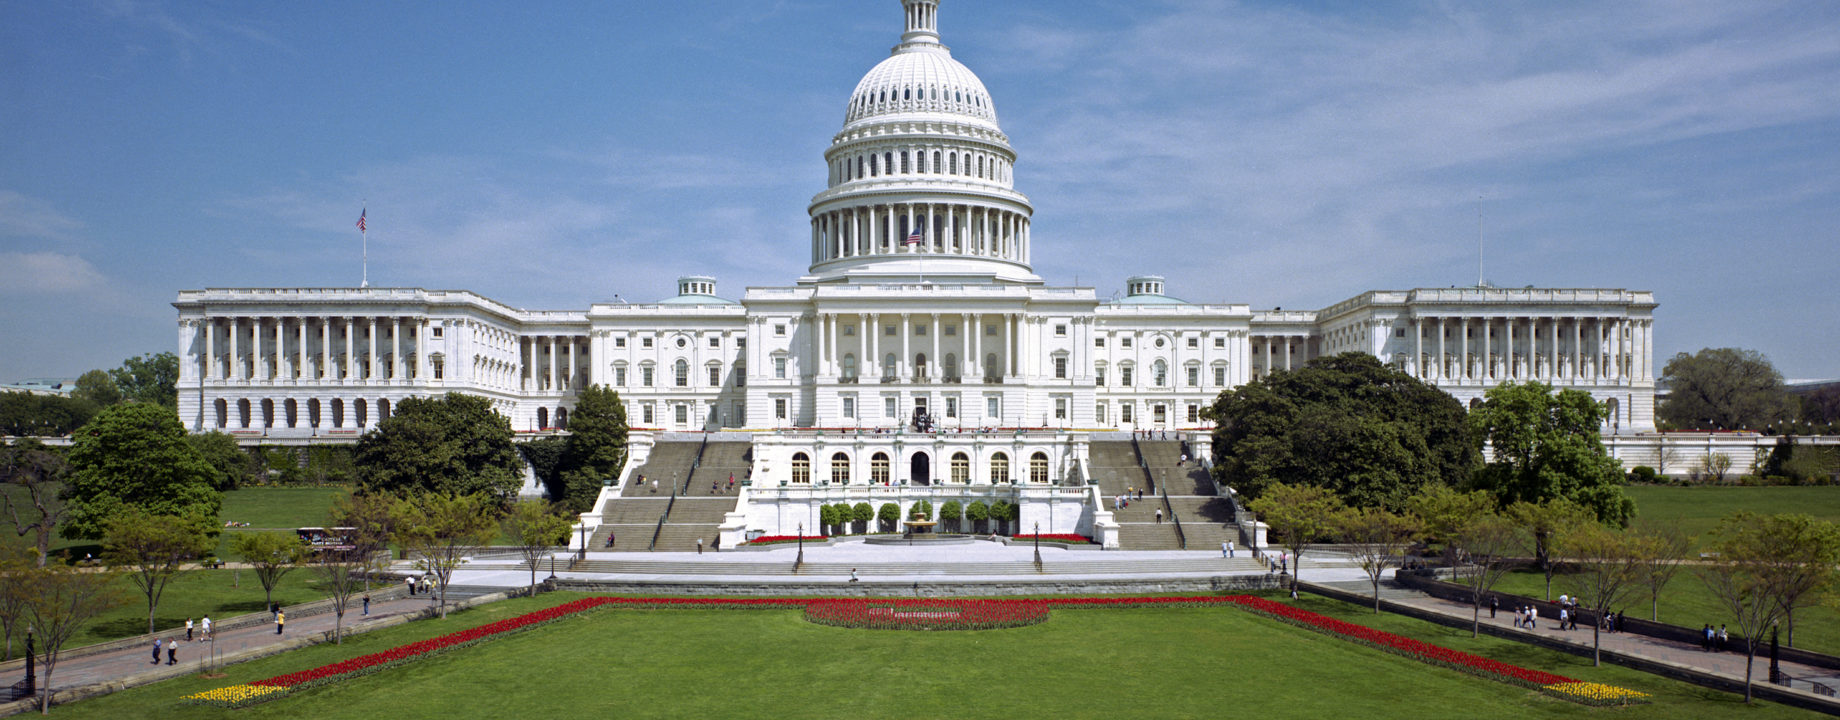 United States Capitol west front edit